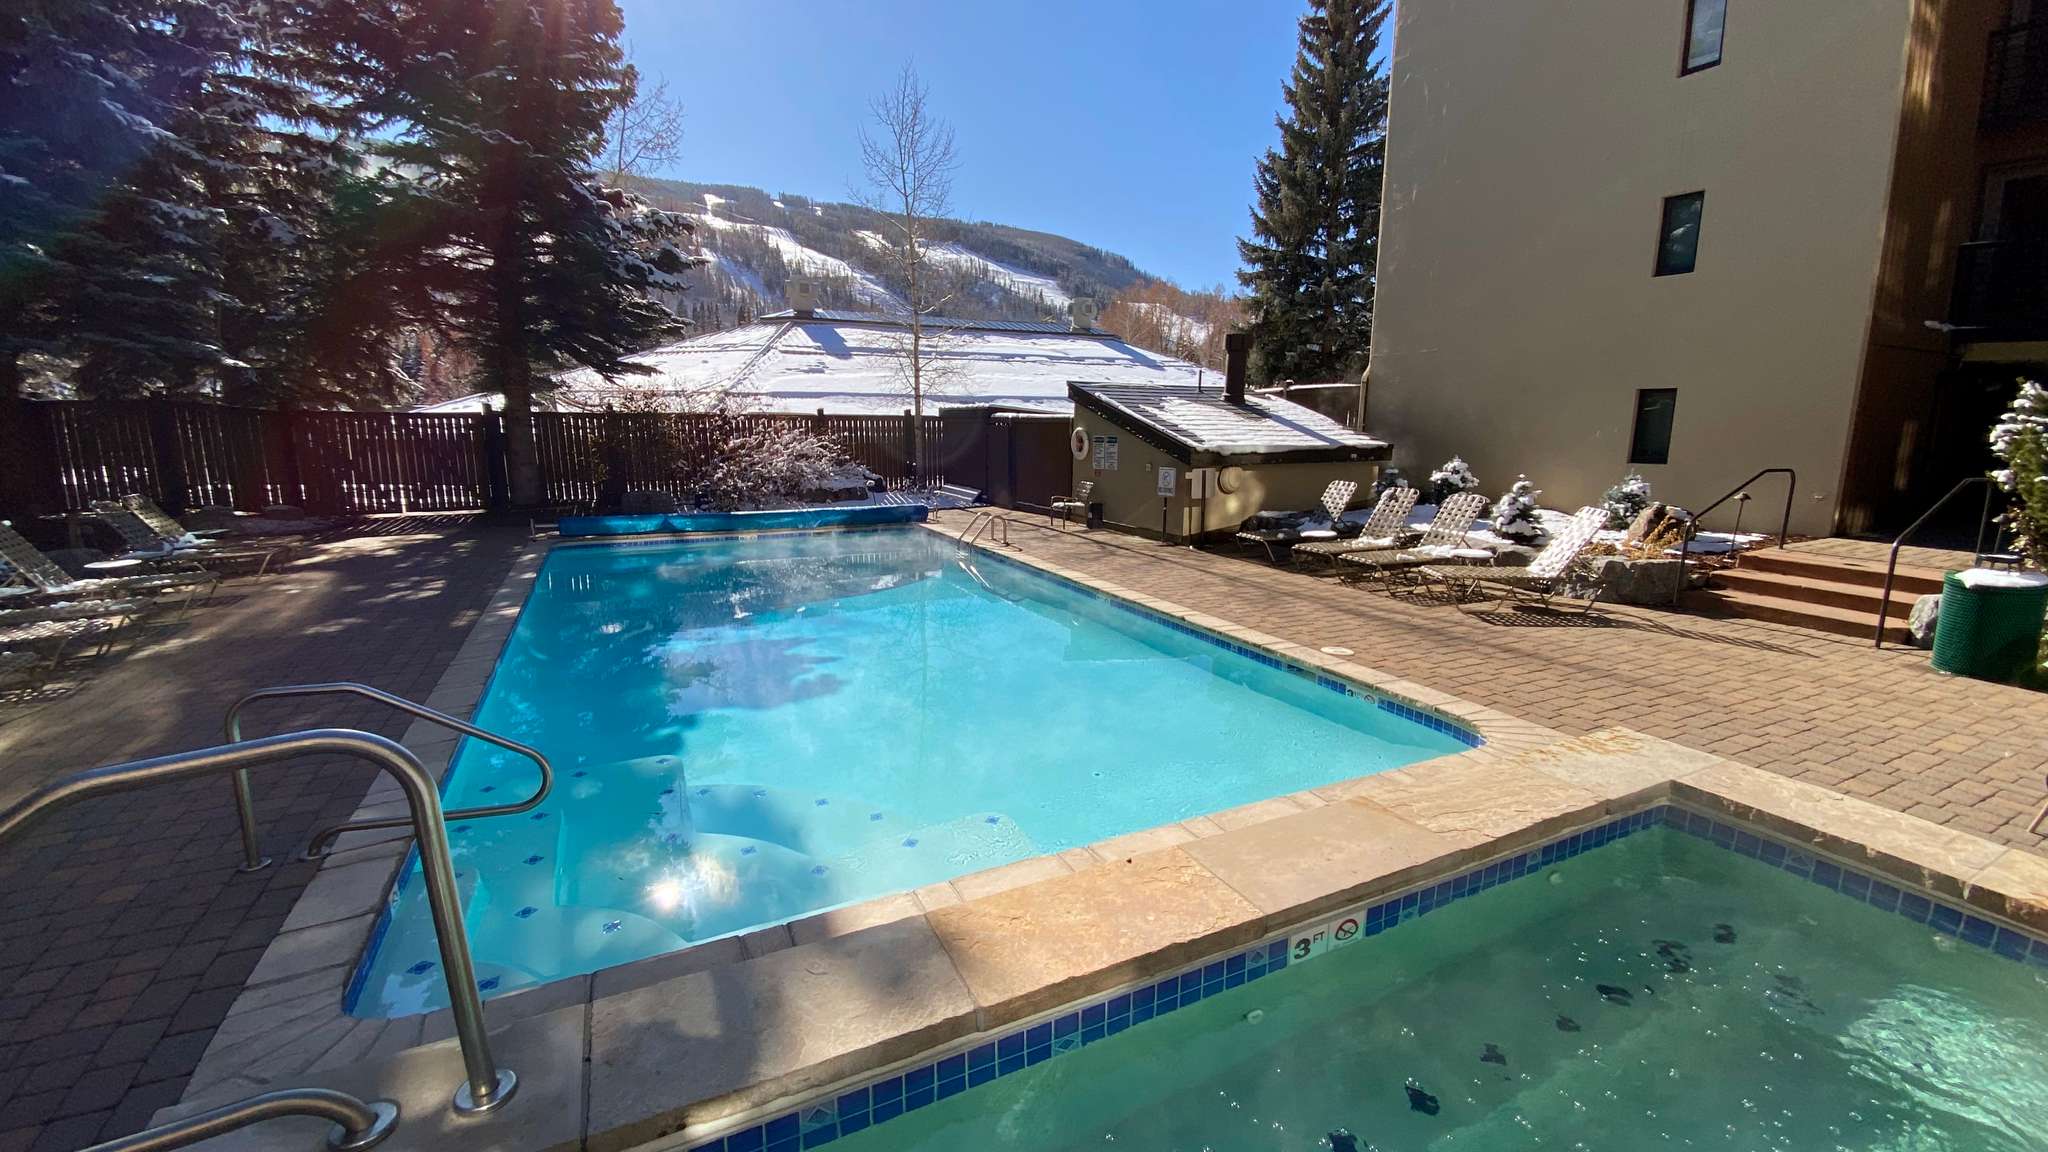 vi-pool-and-ht-to-mtn-winter-clear-water-nov-2019-4032x